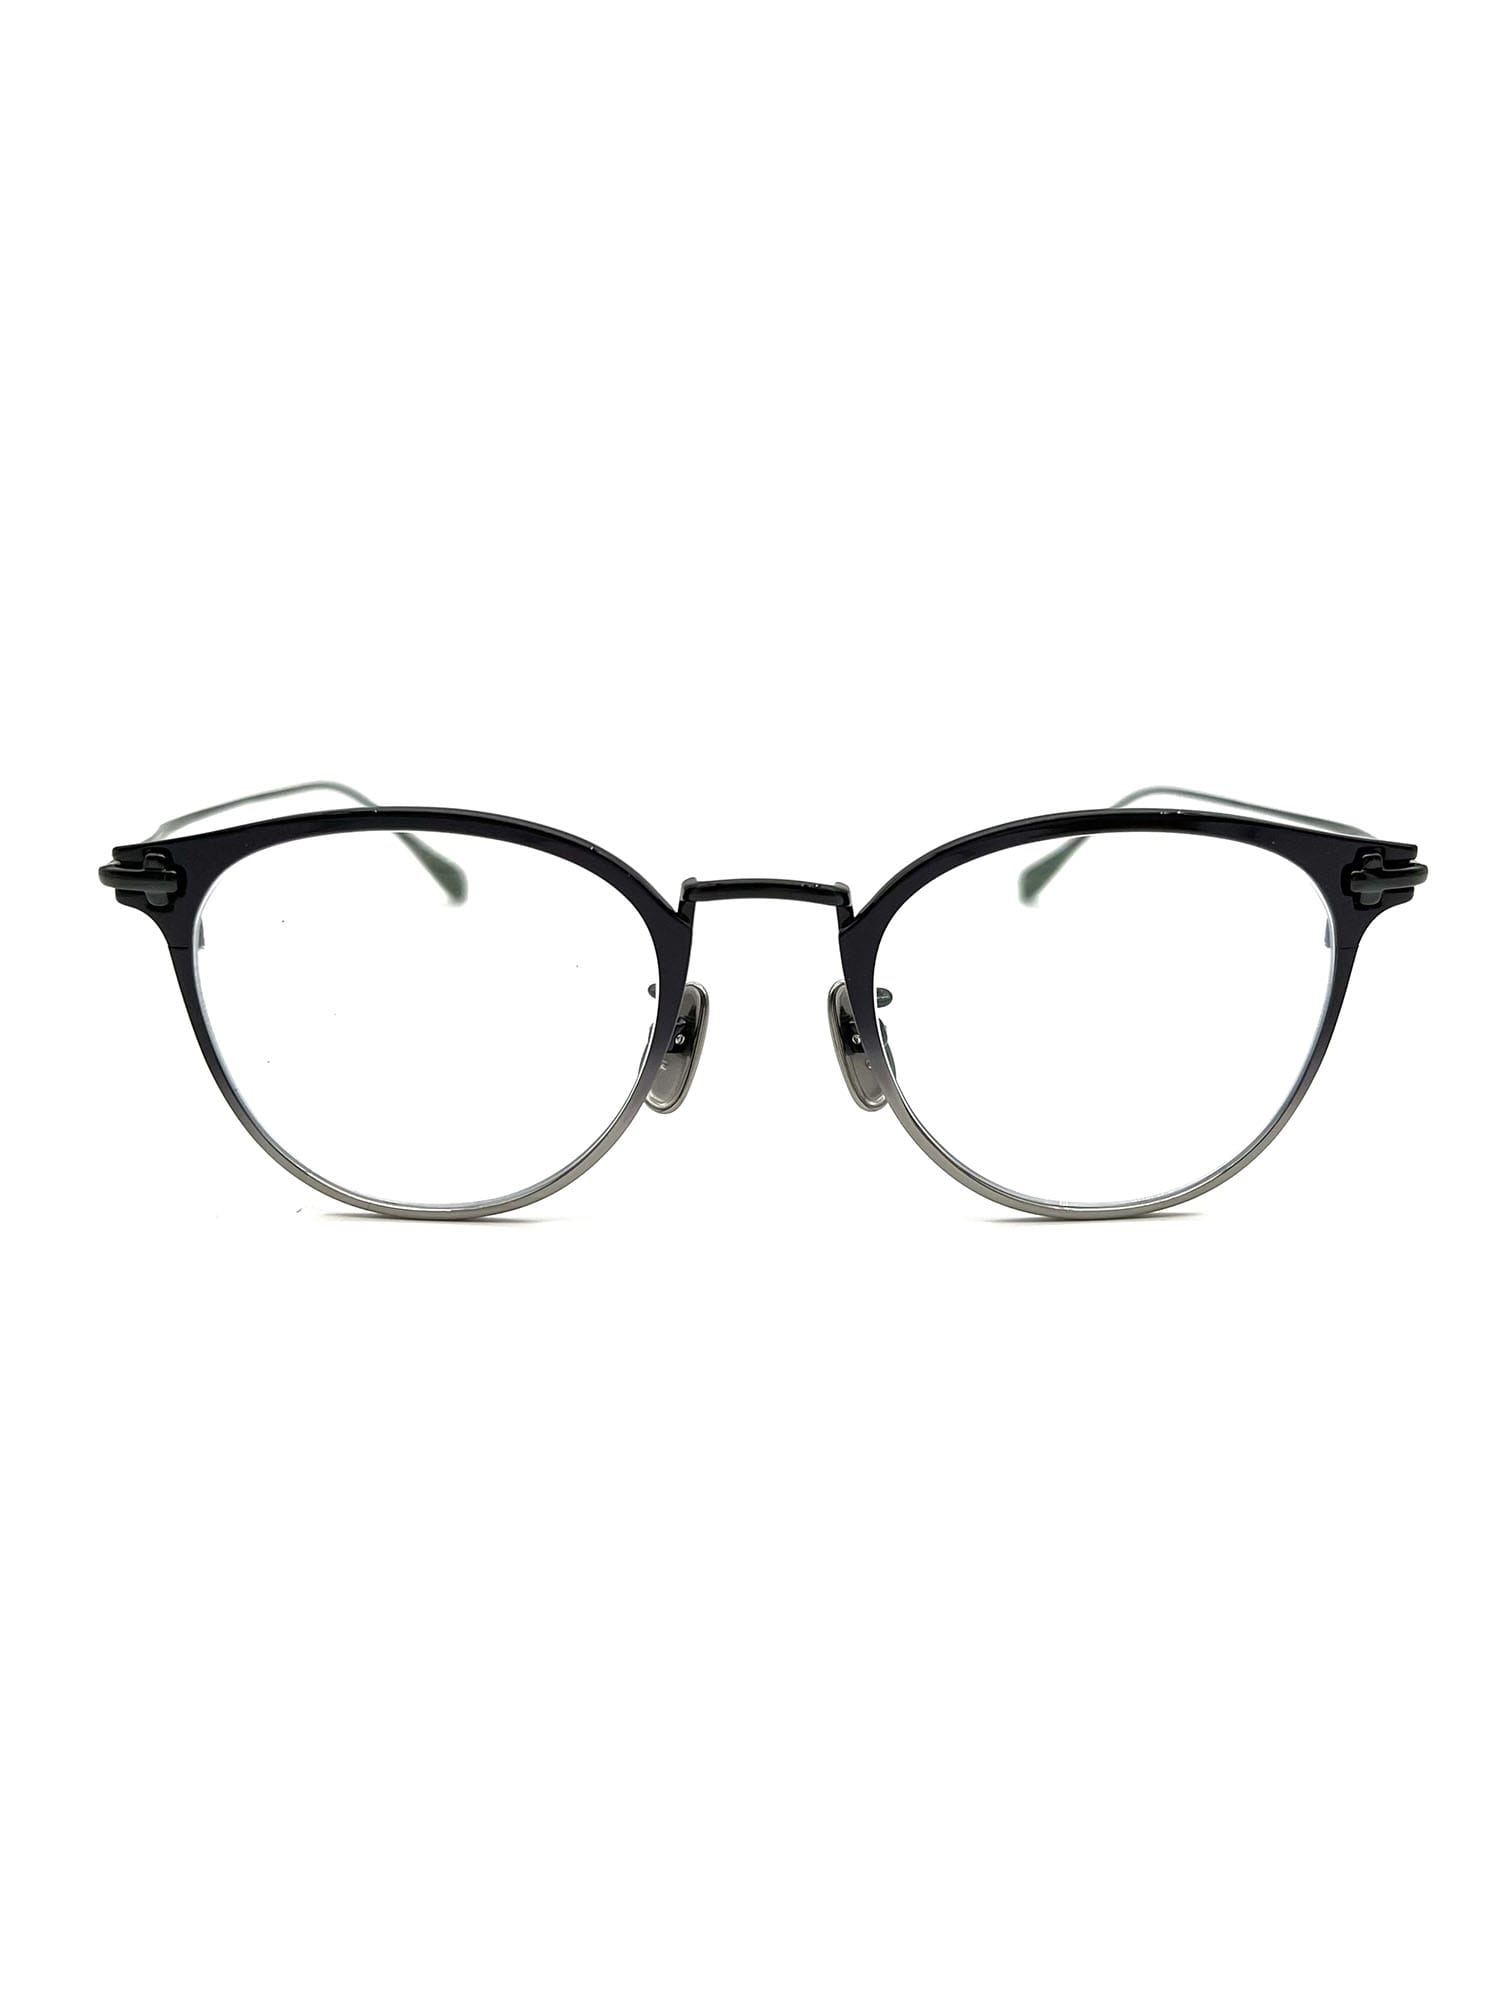 Taylor With Respect Plural Eyewear In Black